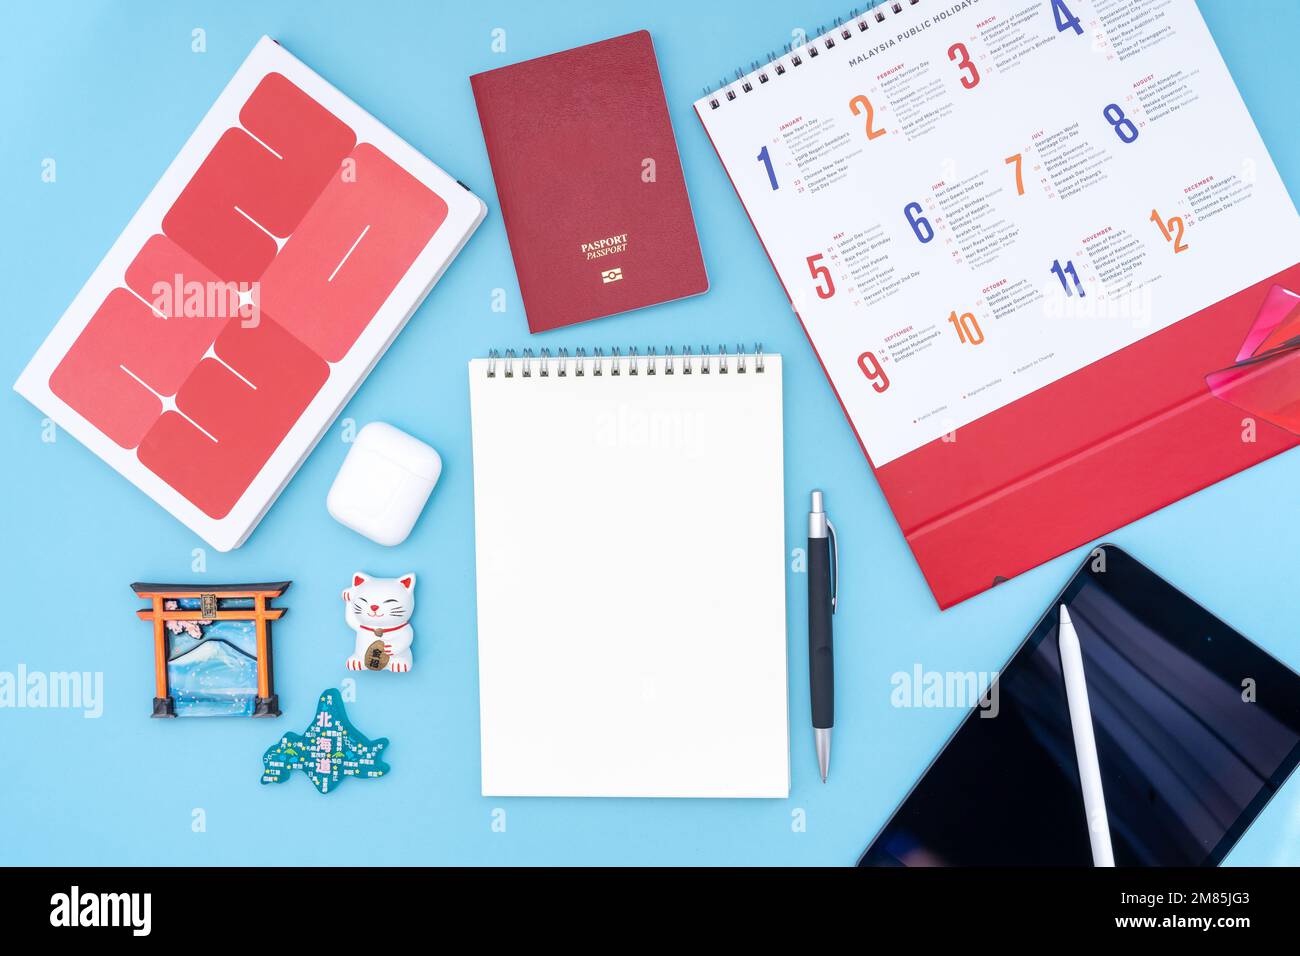 Vacation, trip or holiday planning concept to Japan - Public Holiday calendar with notepad, pen, earphone, and tablet on blue background. Stock Photo